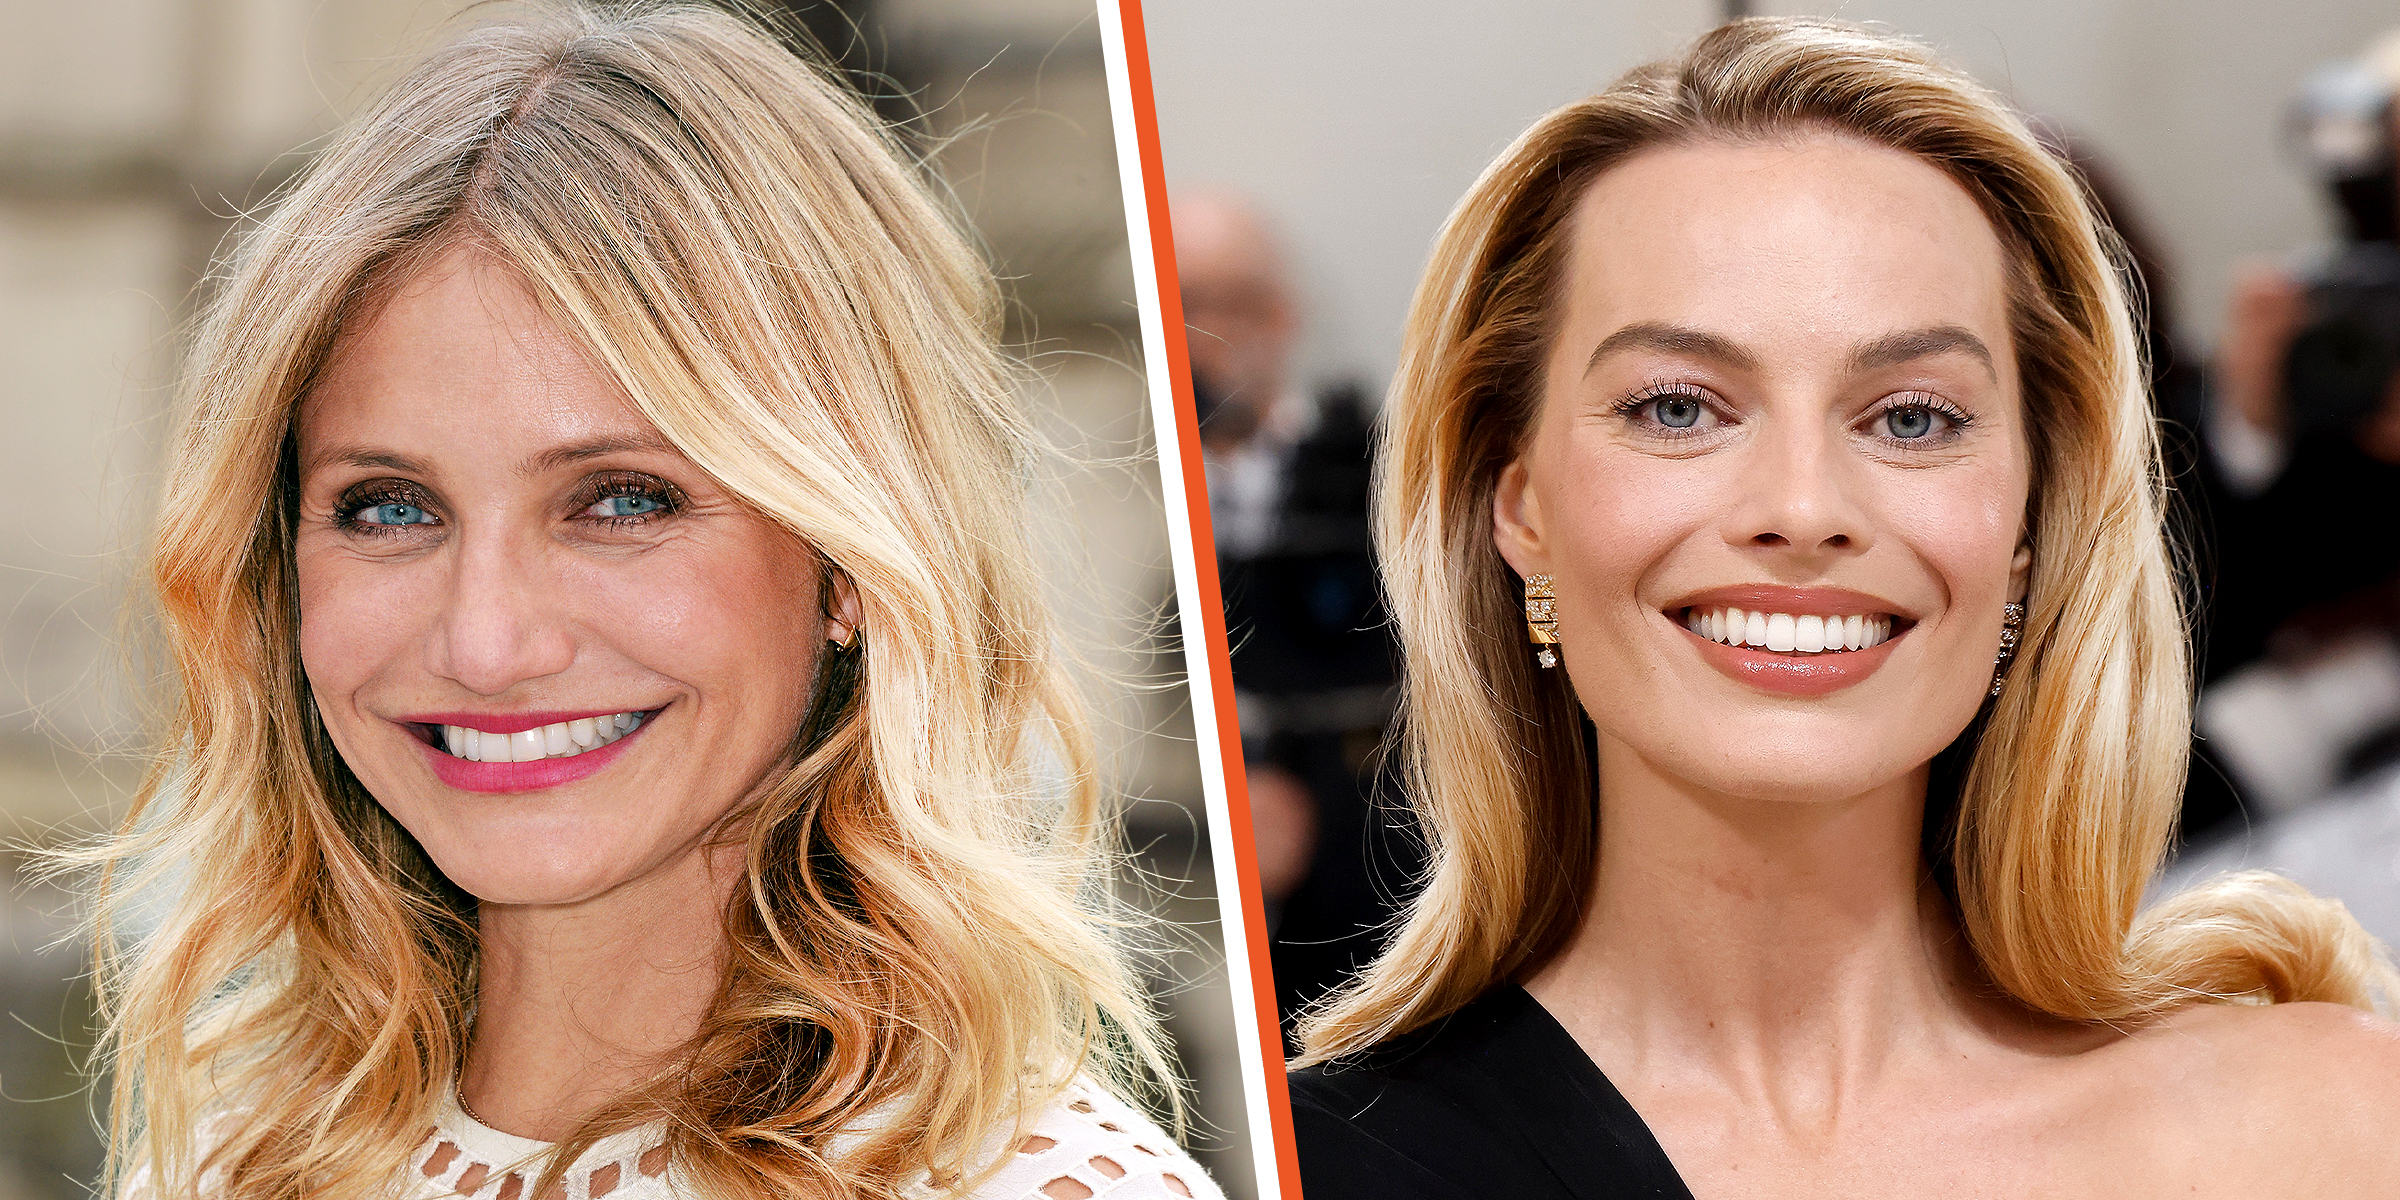 Cameron Diaz and Margot Robbie | Source: Getty Images